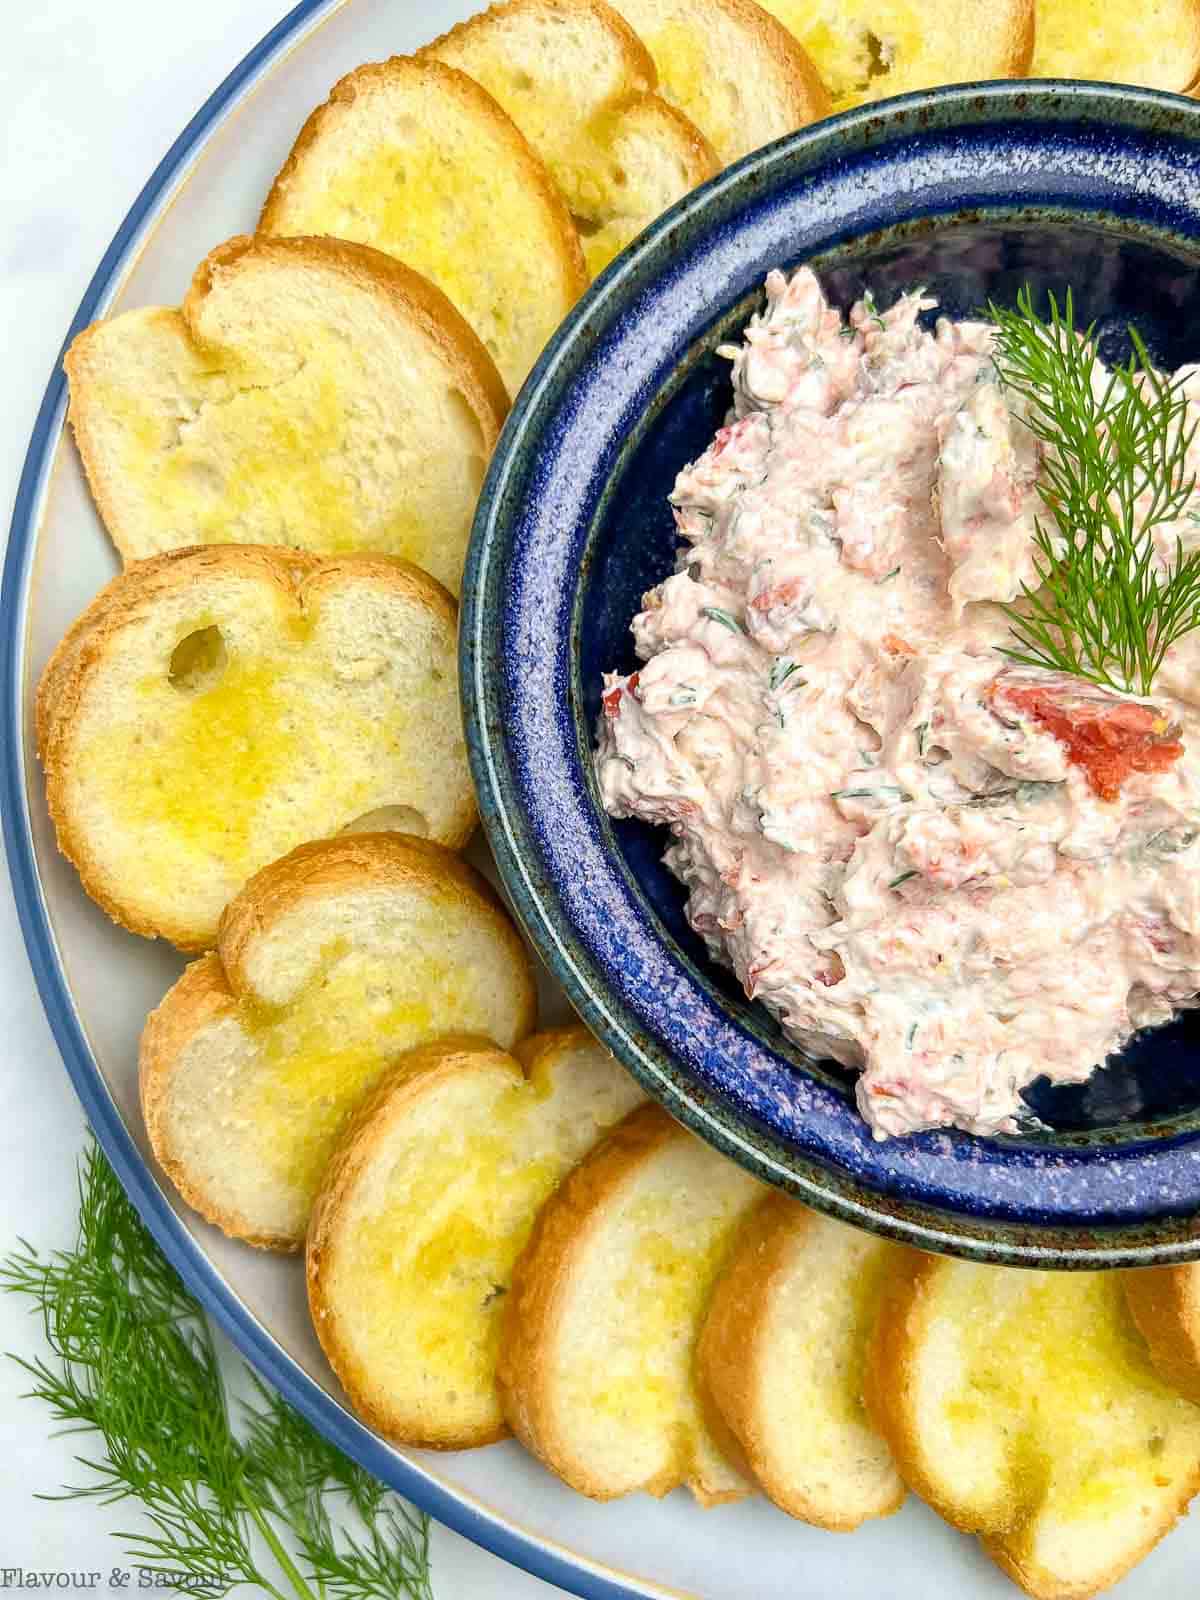 Smoked salmon dip in a bowl surrounded by crostini.